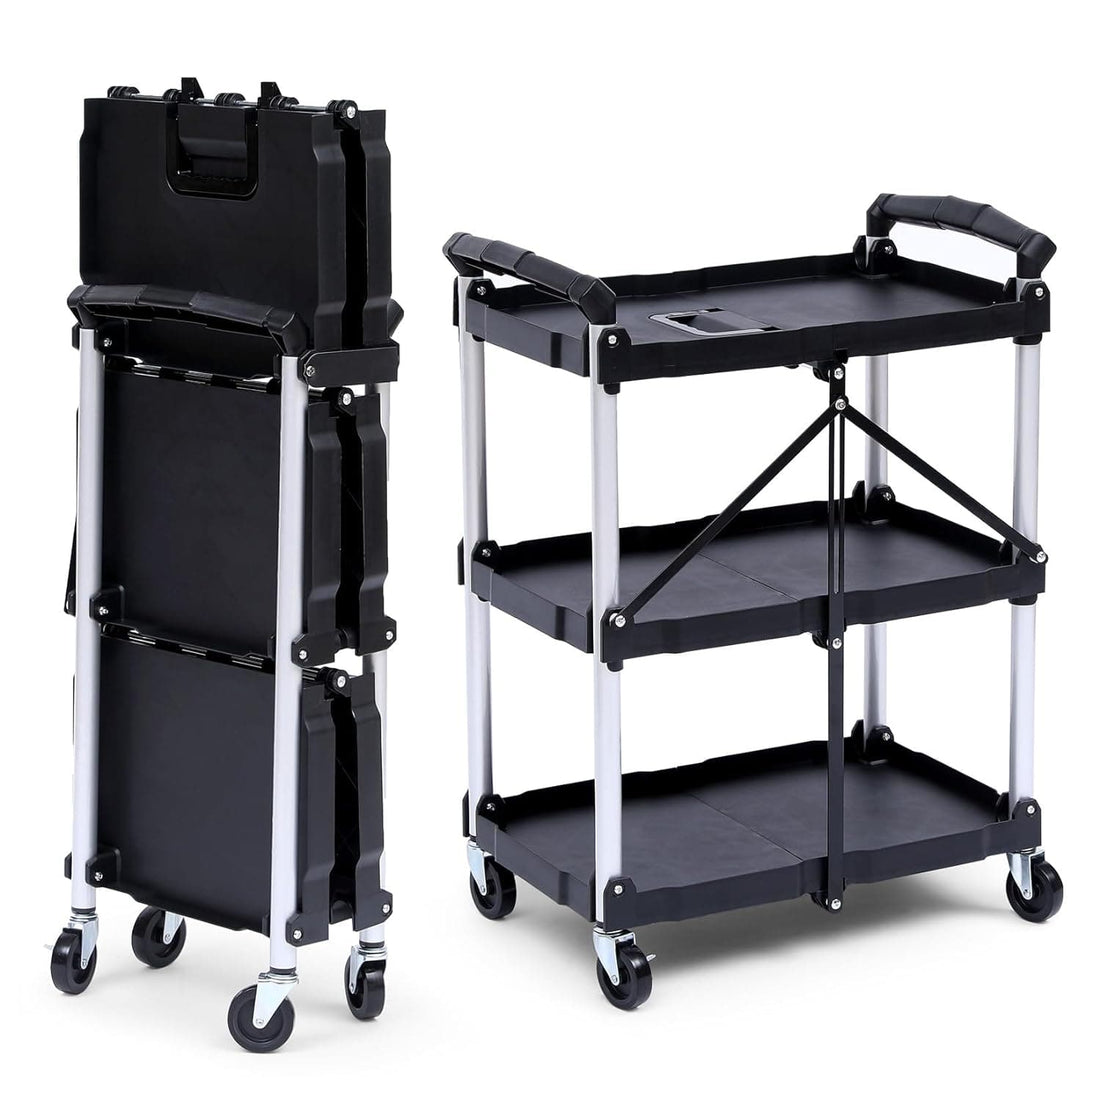 Folding Utility Cart with Wheels - Foldable 3-Tier Rolling Cart with Lockable Wheels, Portable Tool Cart for Office, Warehouse, Home, Garage, Kitchen